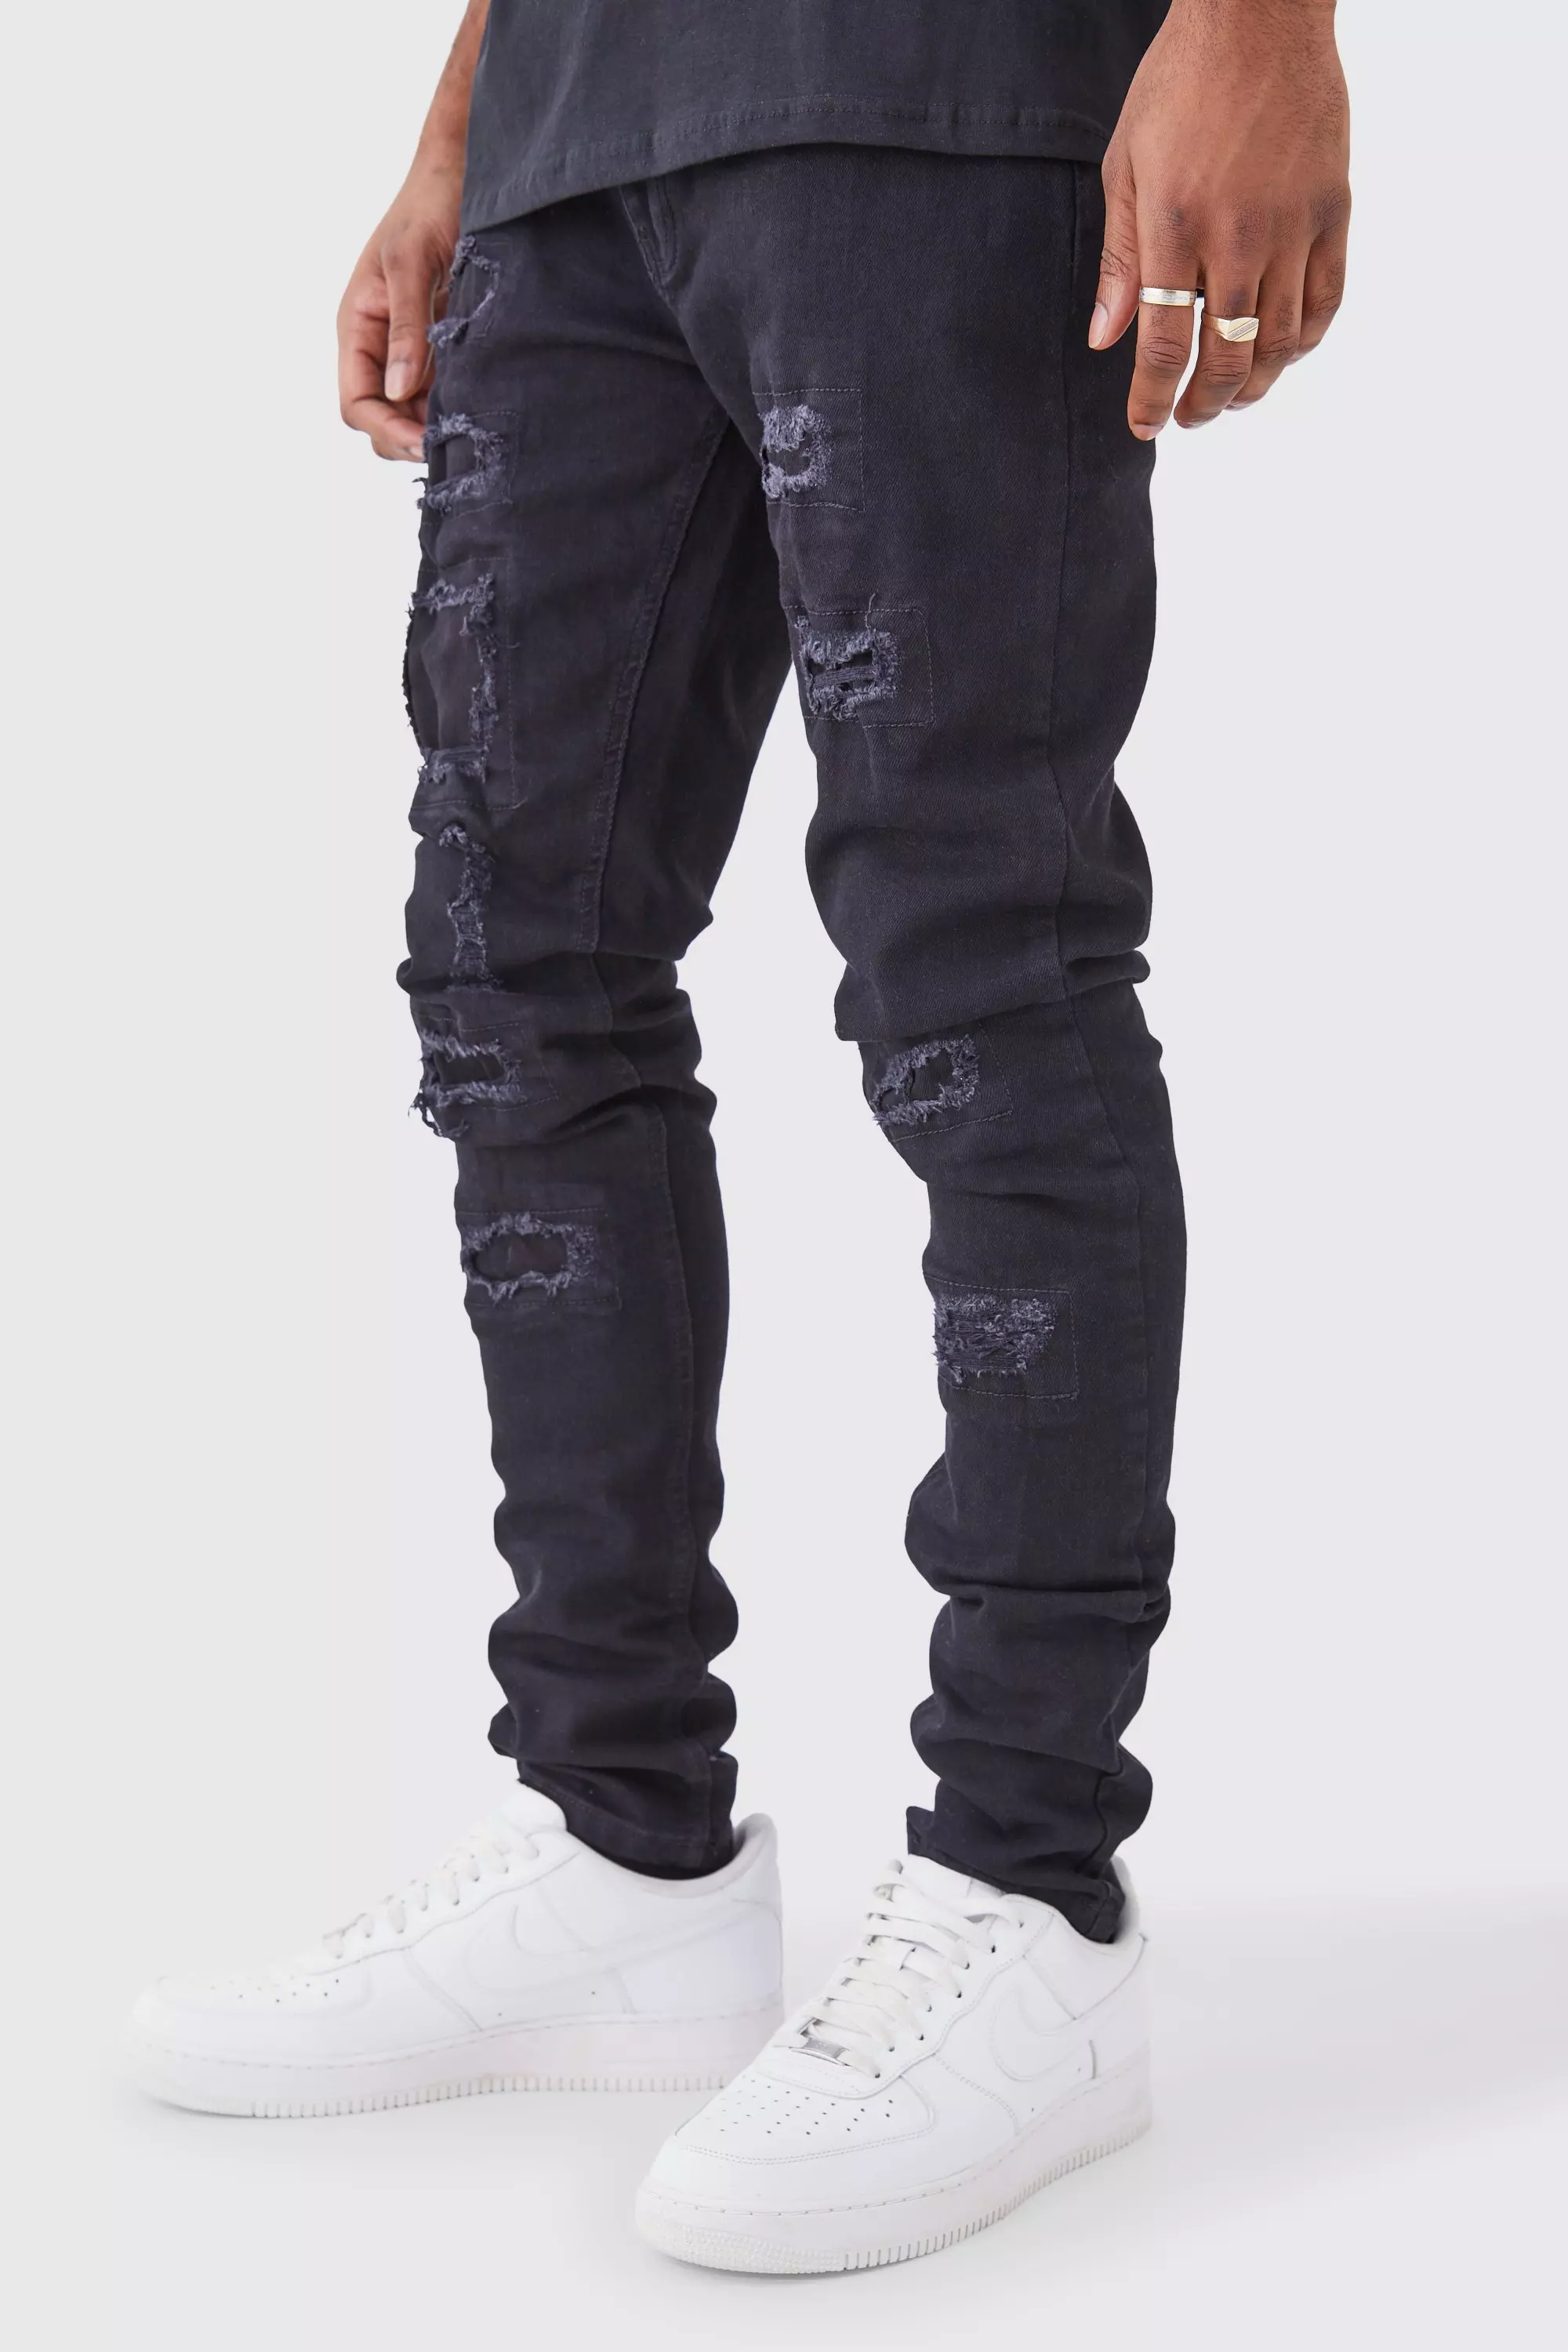 Black Tall Skinny Stacked Distressed Ripped Jeans